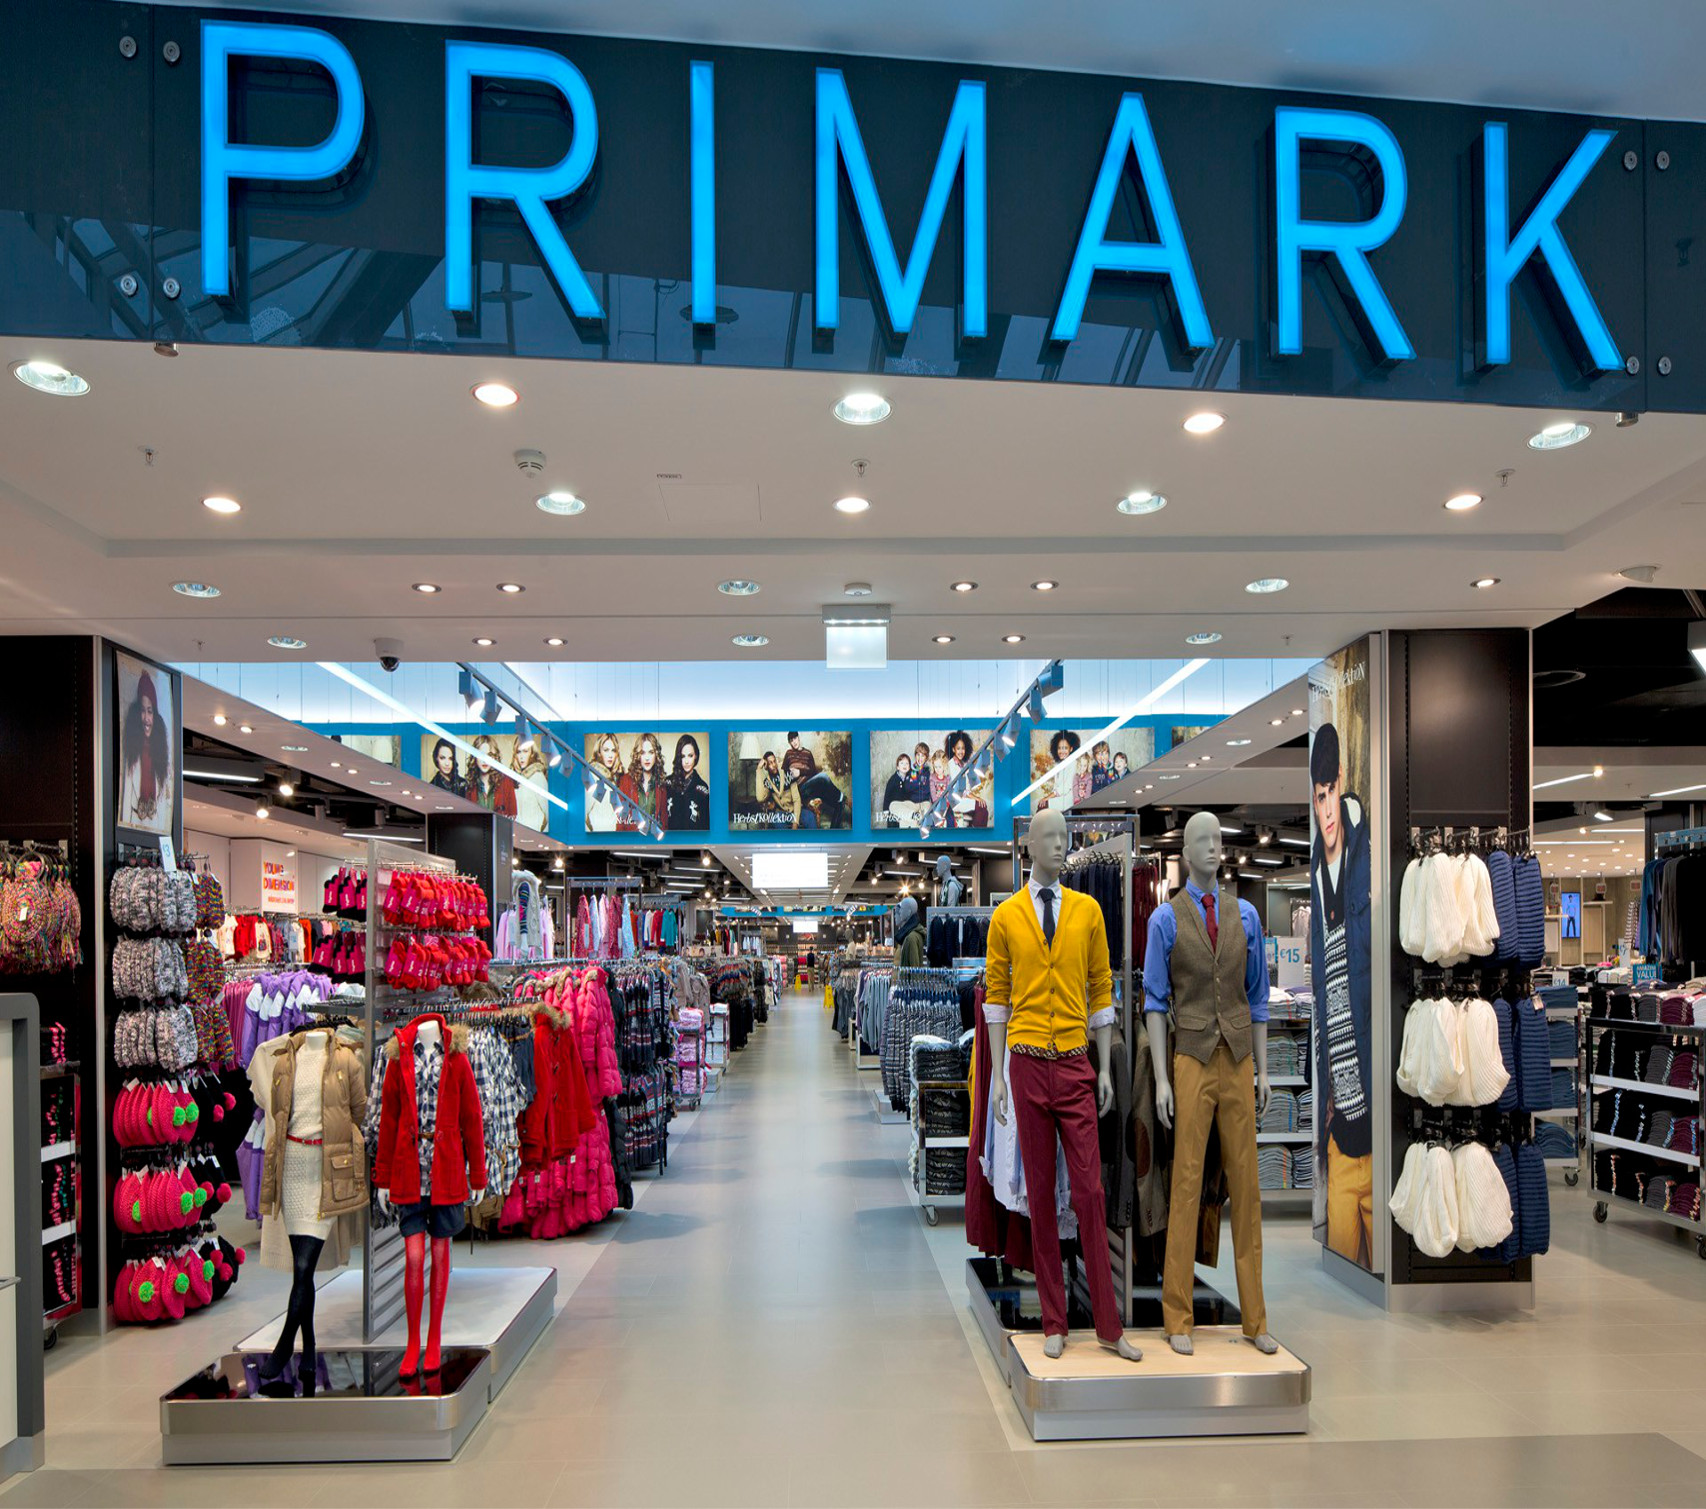 Does Primark's trade mark enjoy protection in South Africa?